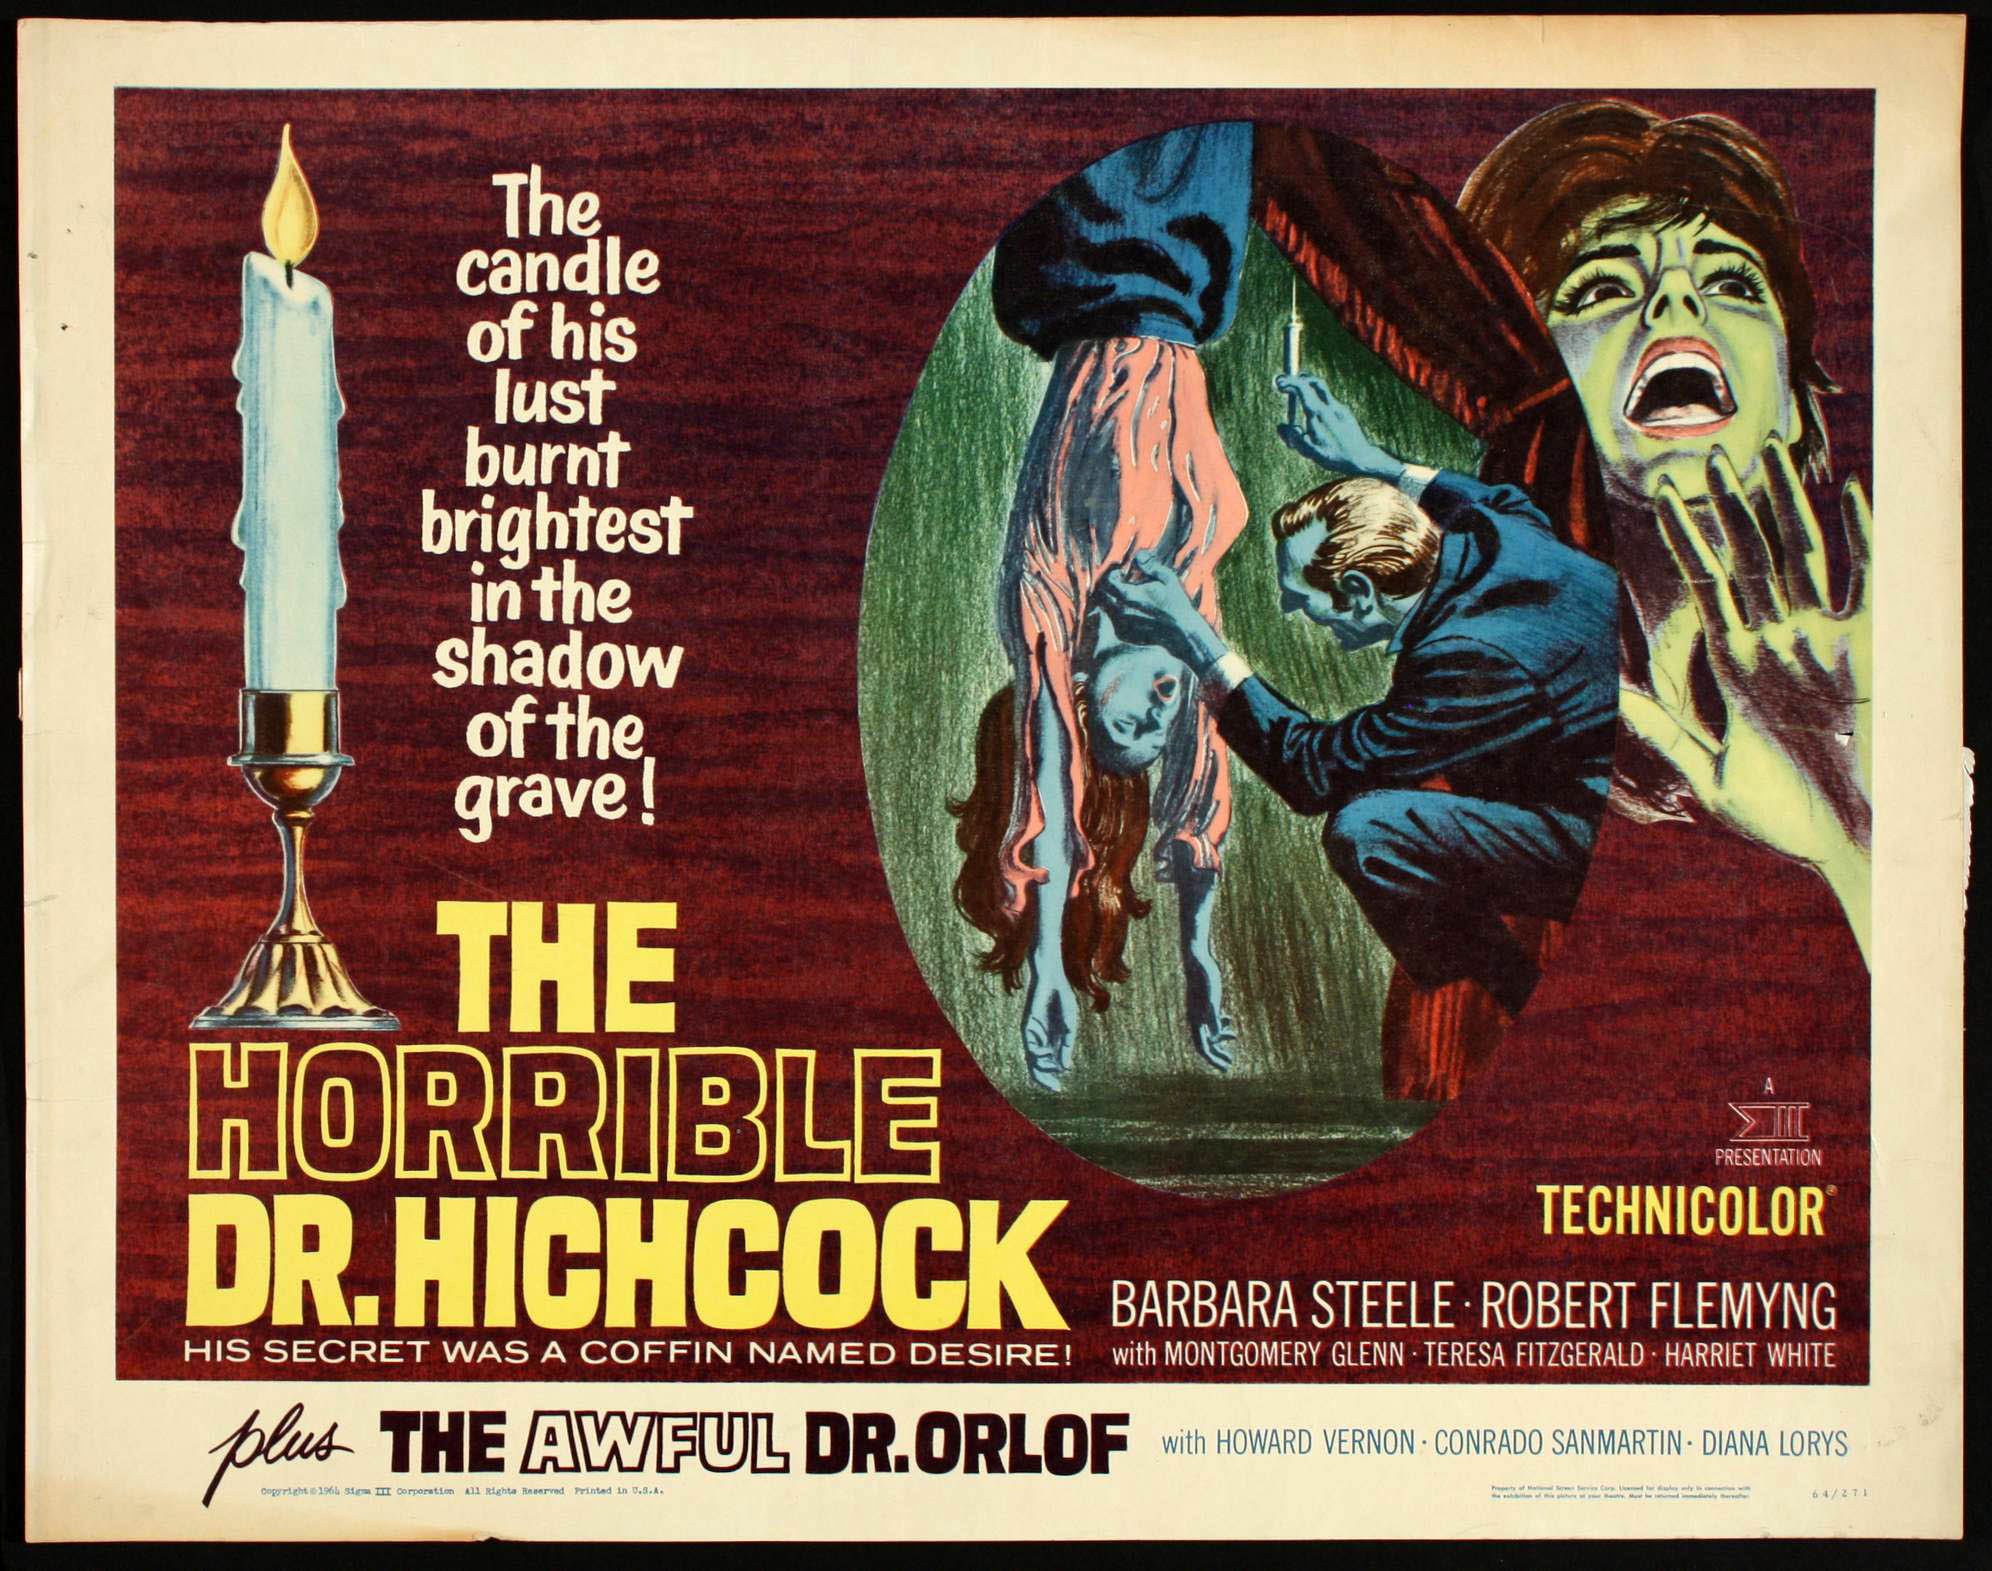 The Horrible Dr. Hichcock -The year is 1885, and necrophiliac Dr. Hitchcock likes to drug his wife for sexual funeral games. One day he accidentally administers an overdose and kills her. He leaves his home shattered. Several years later he remarries and returns. Discovering that his still beloved first wife is alive but insane and prematurely aged, he plans to use the blood of his new bride to rejuvenate and heal her.